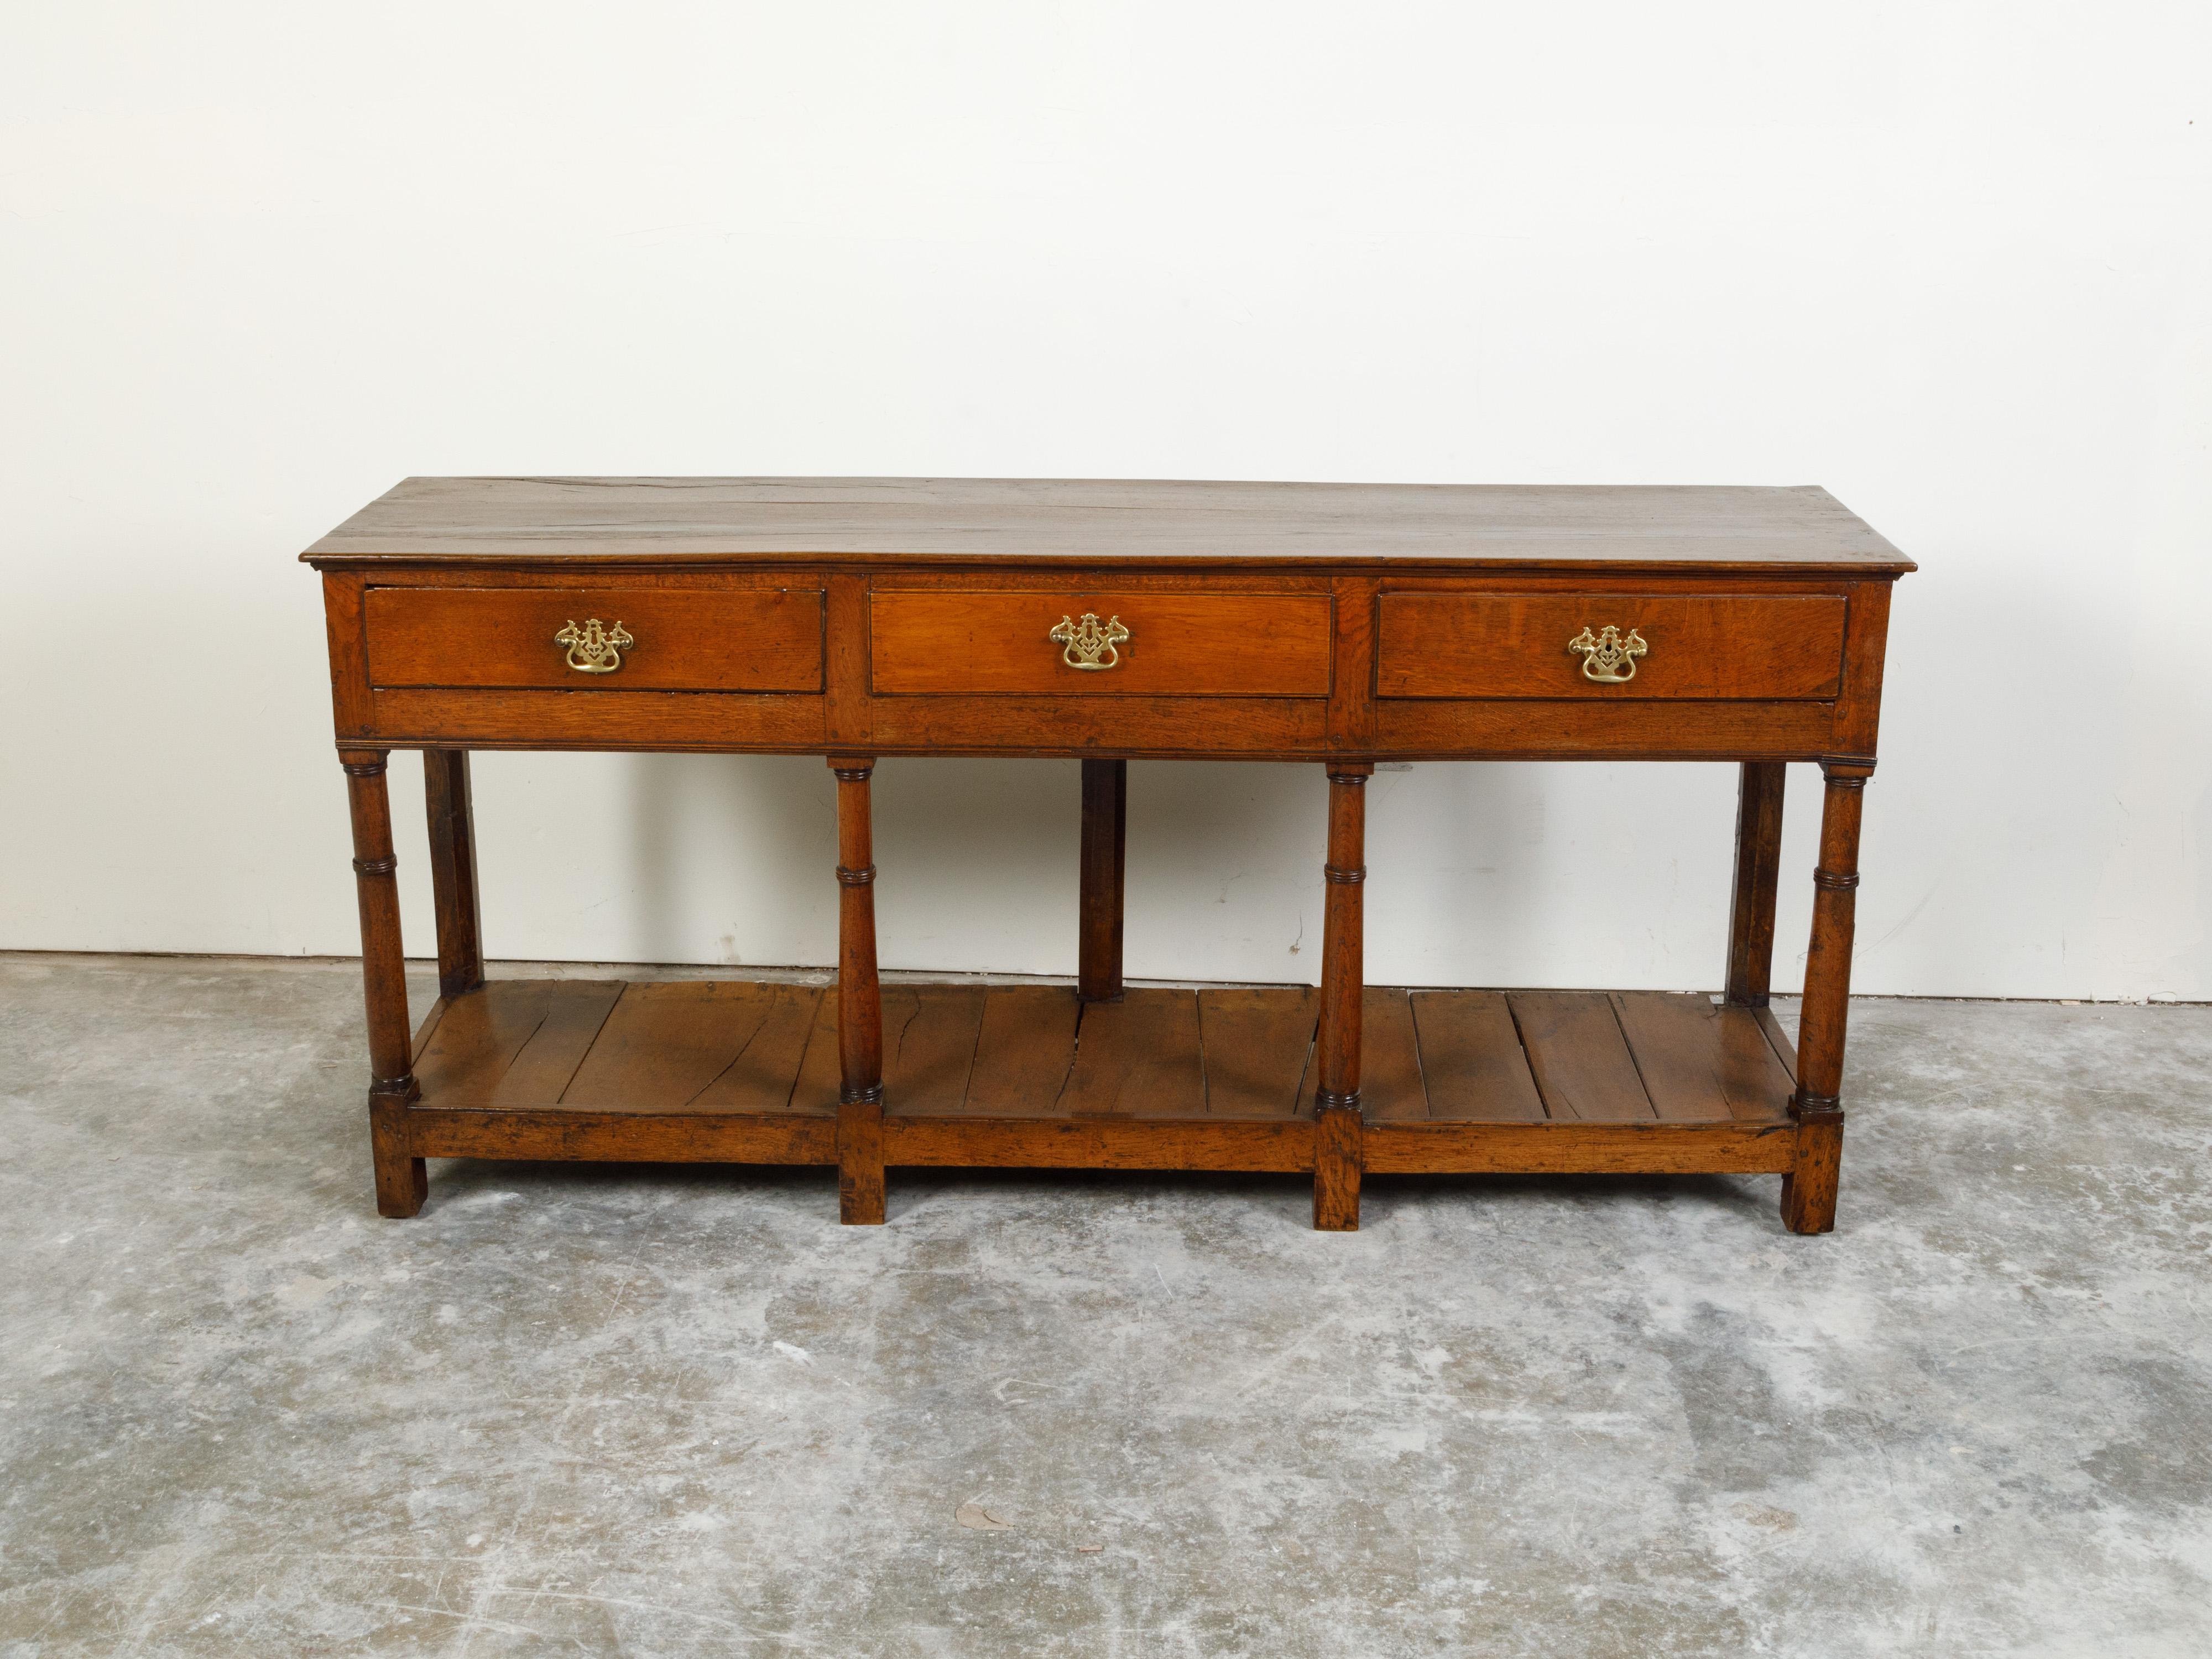 An English Georgian period oak dresser base from the early 19th century, with three drawers and pot board shelf. Created in England during the first quarter of the 19th century, this dresser base features a rectangular top sitting above three